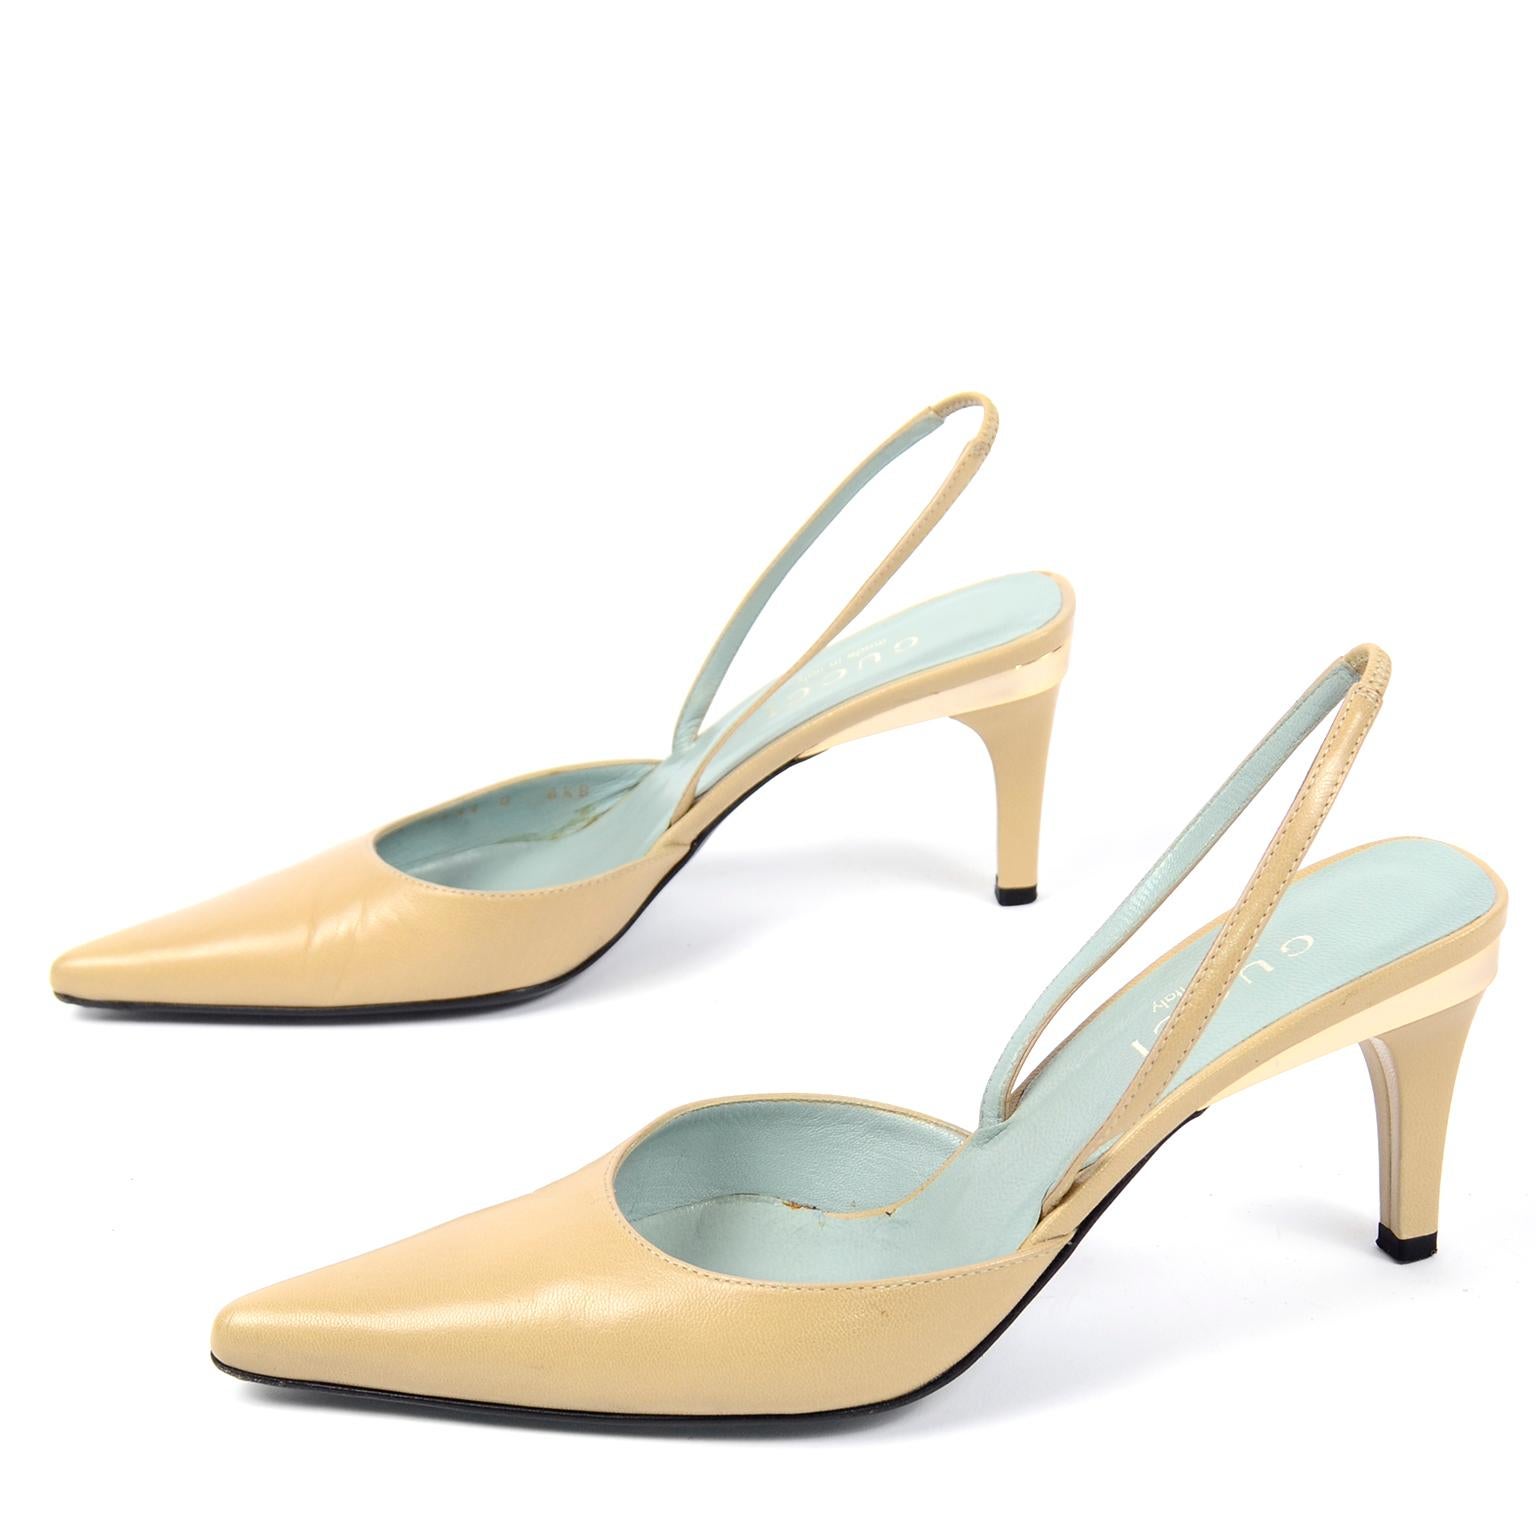 Gucci Slingback Beige Tan Heels With Gold Bands In Good Condition For Sale In Portland, OR